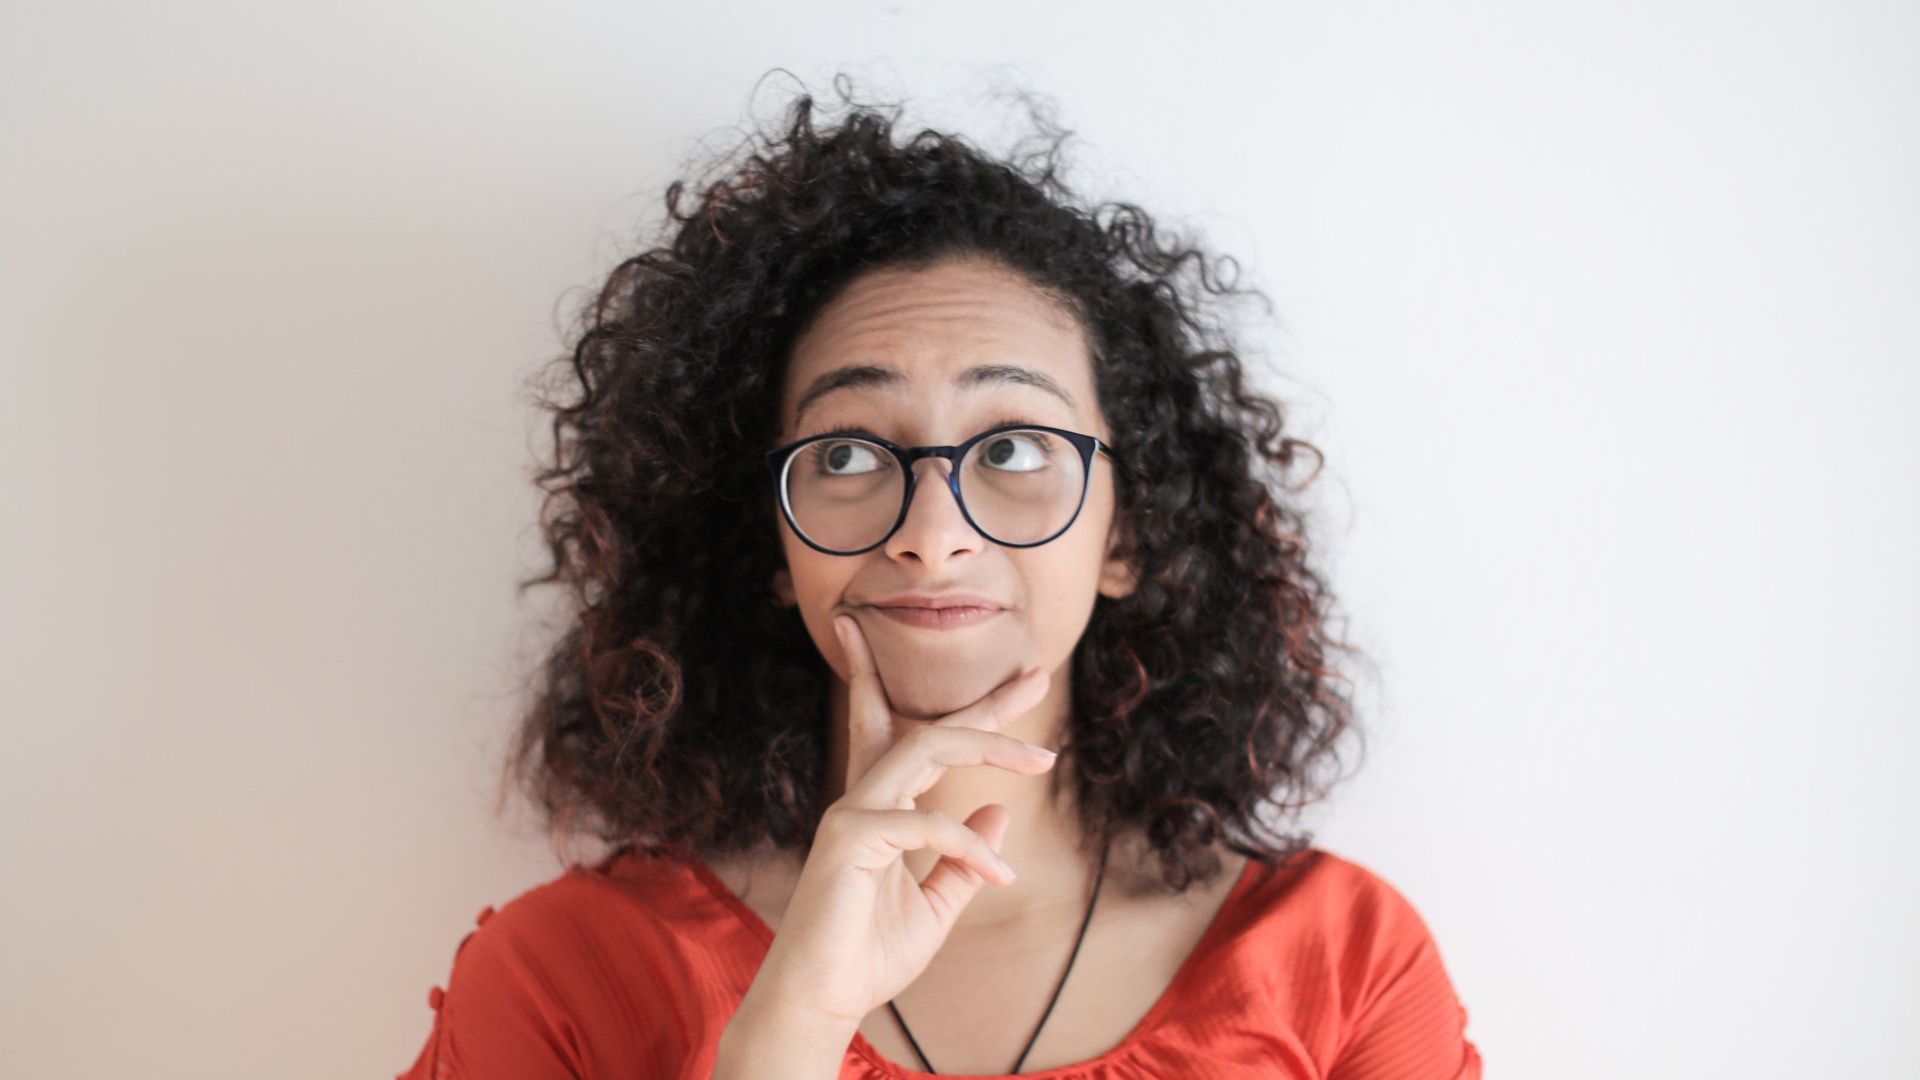 A woman with curly hair and glasses is thinking about something.